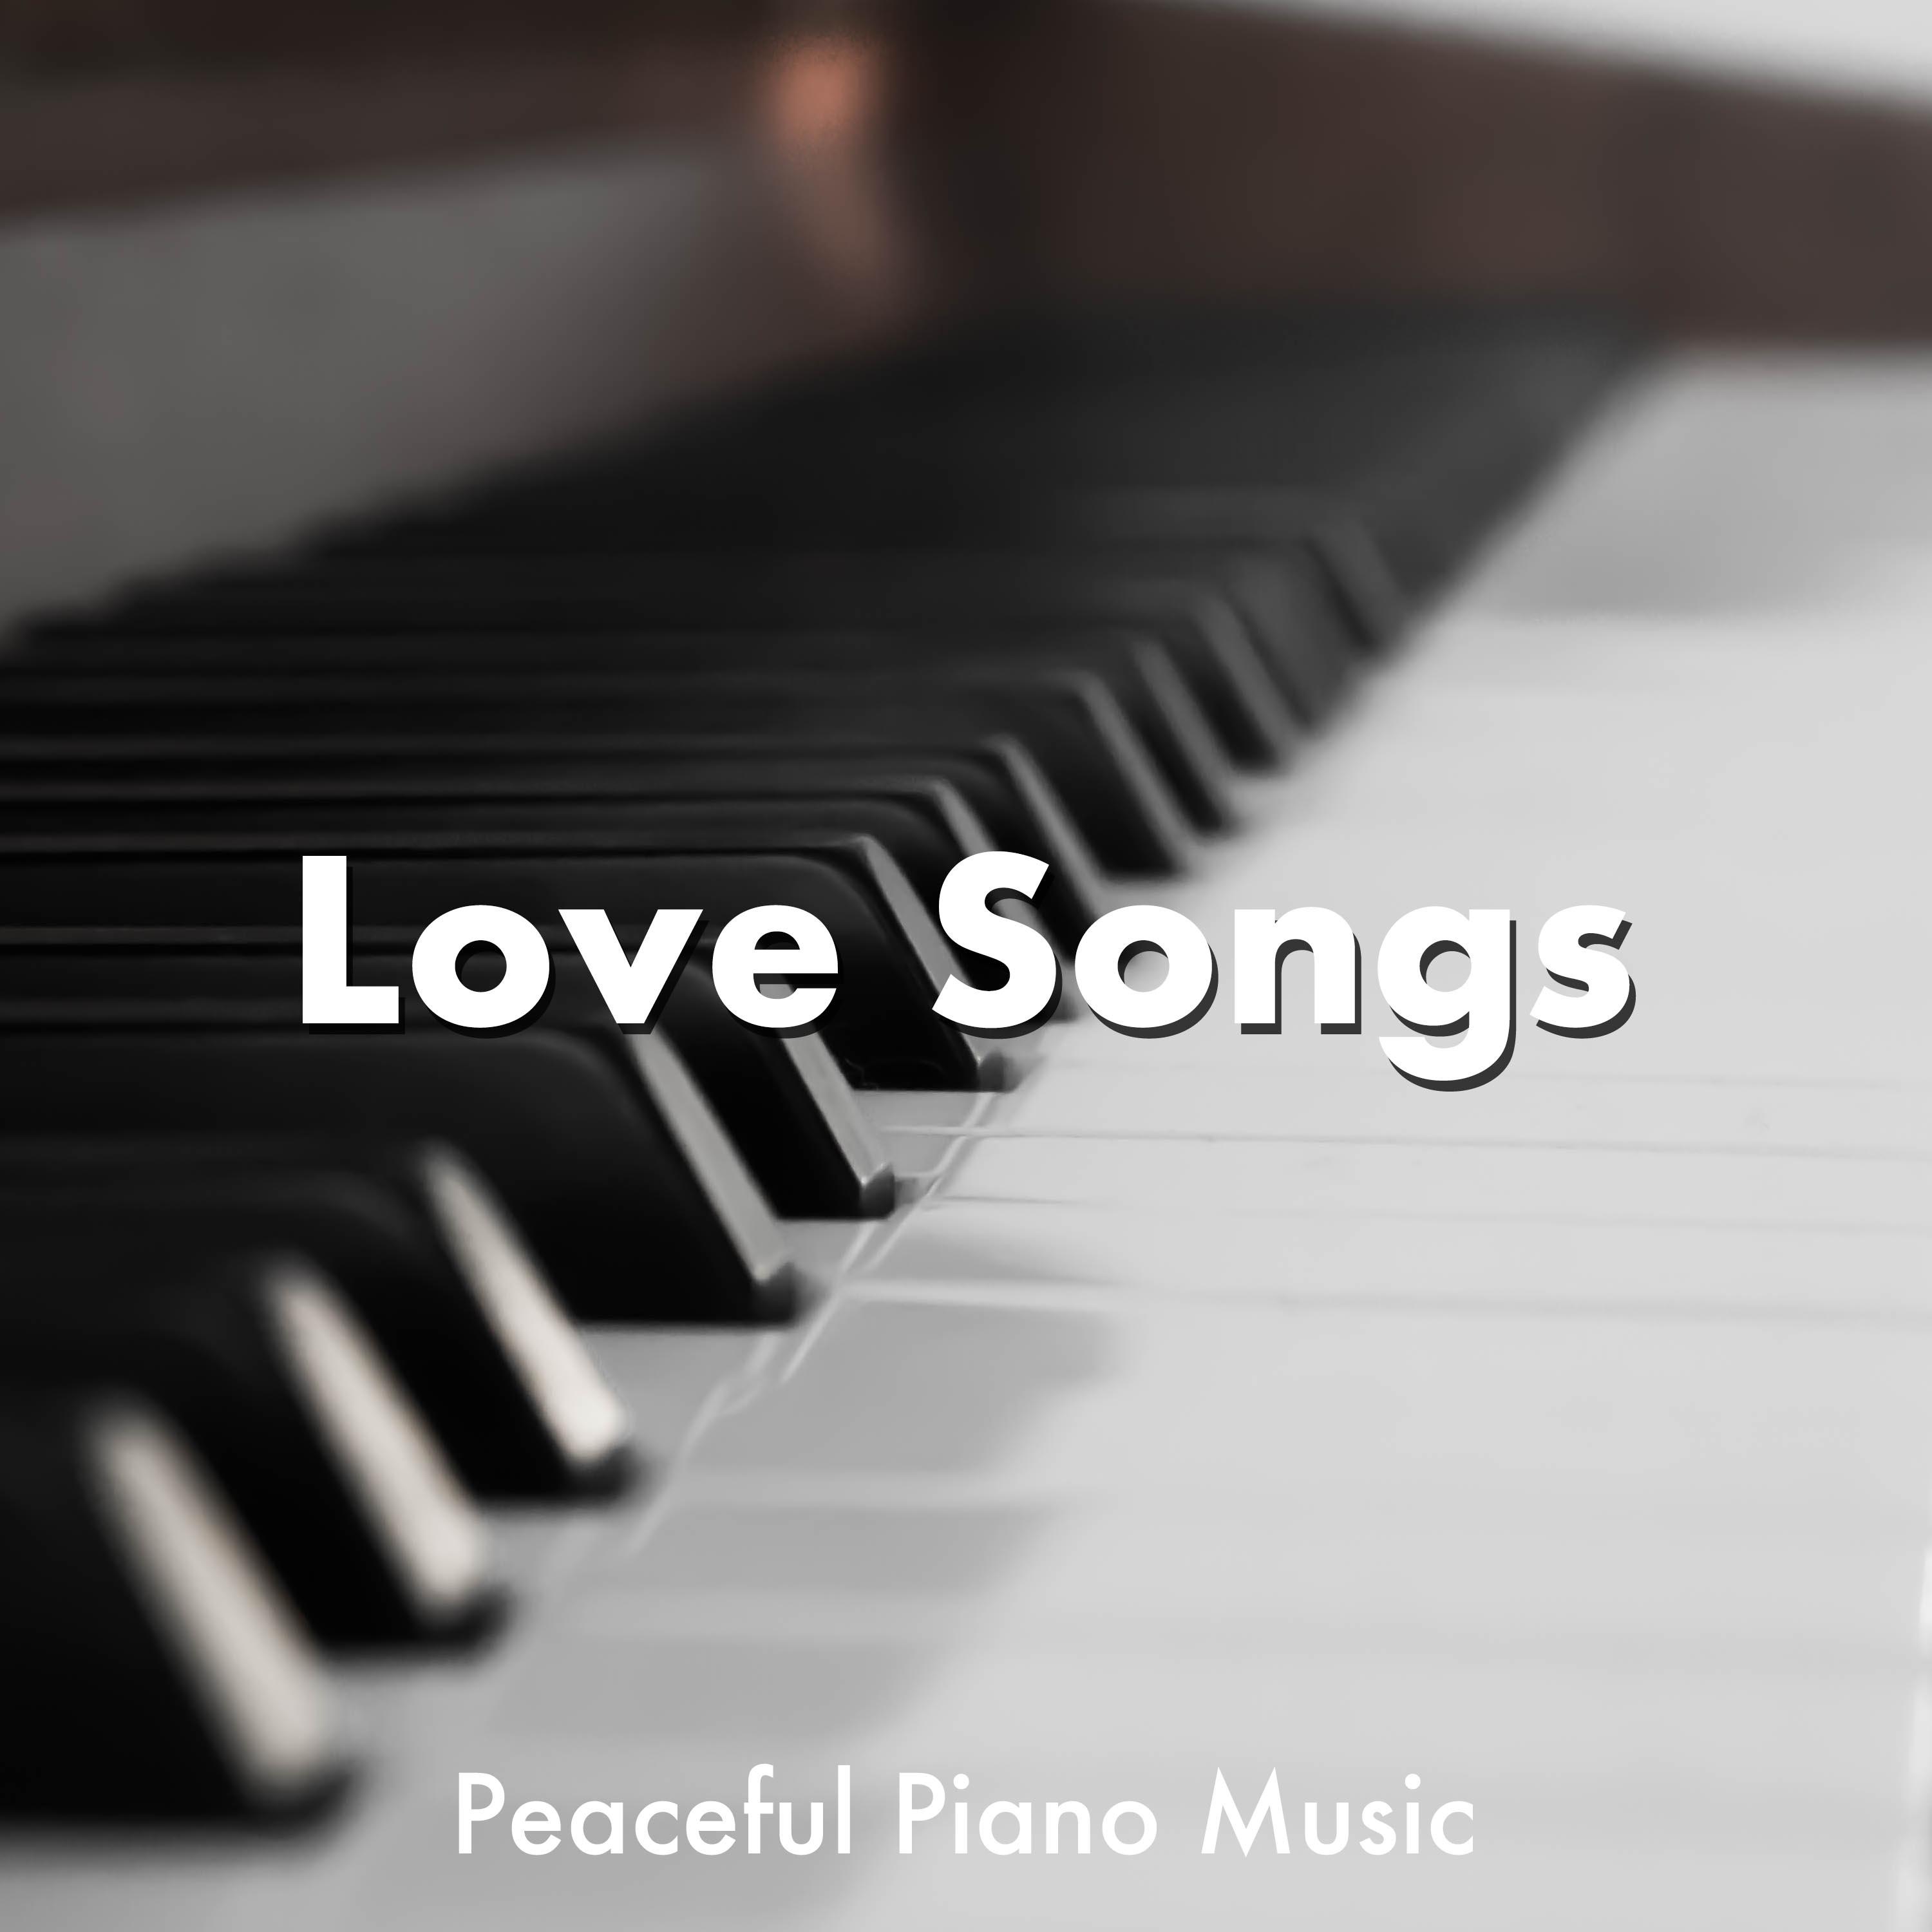 Love Songs - Most Wonderful and Beautiful Long Peaceful Piano Music Playlist Compilation